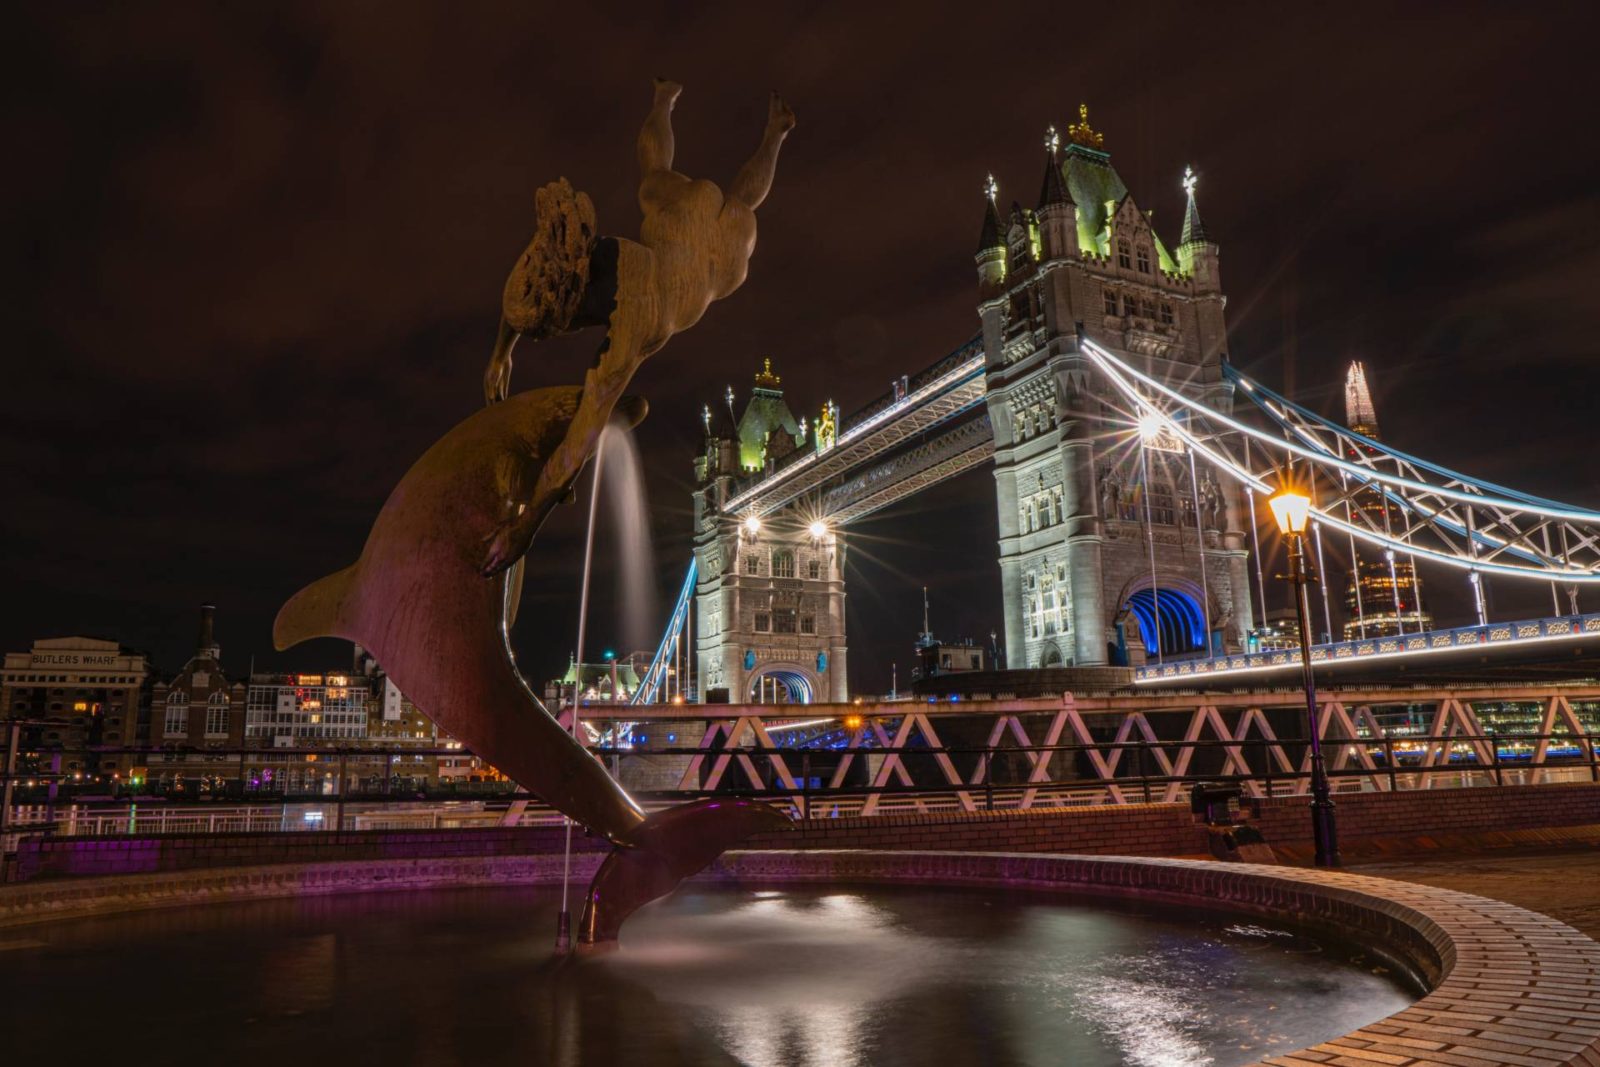 Tower Bridge light up at night with a fountain in front